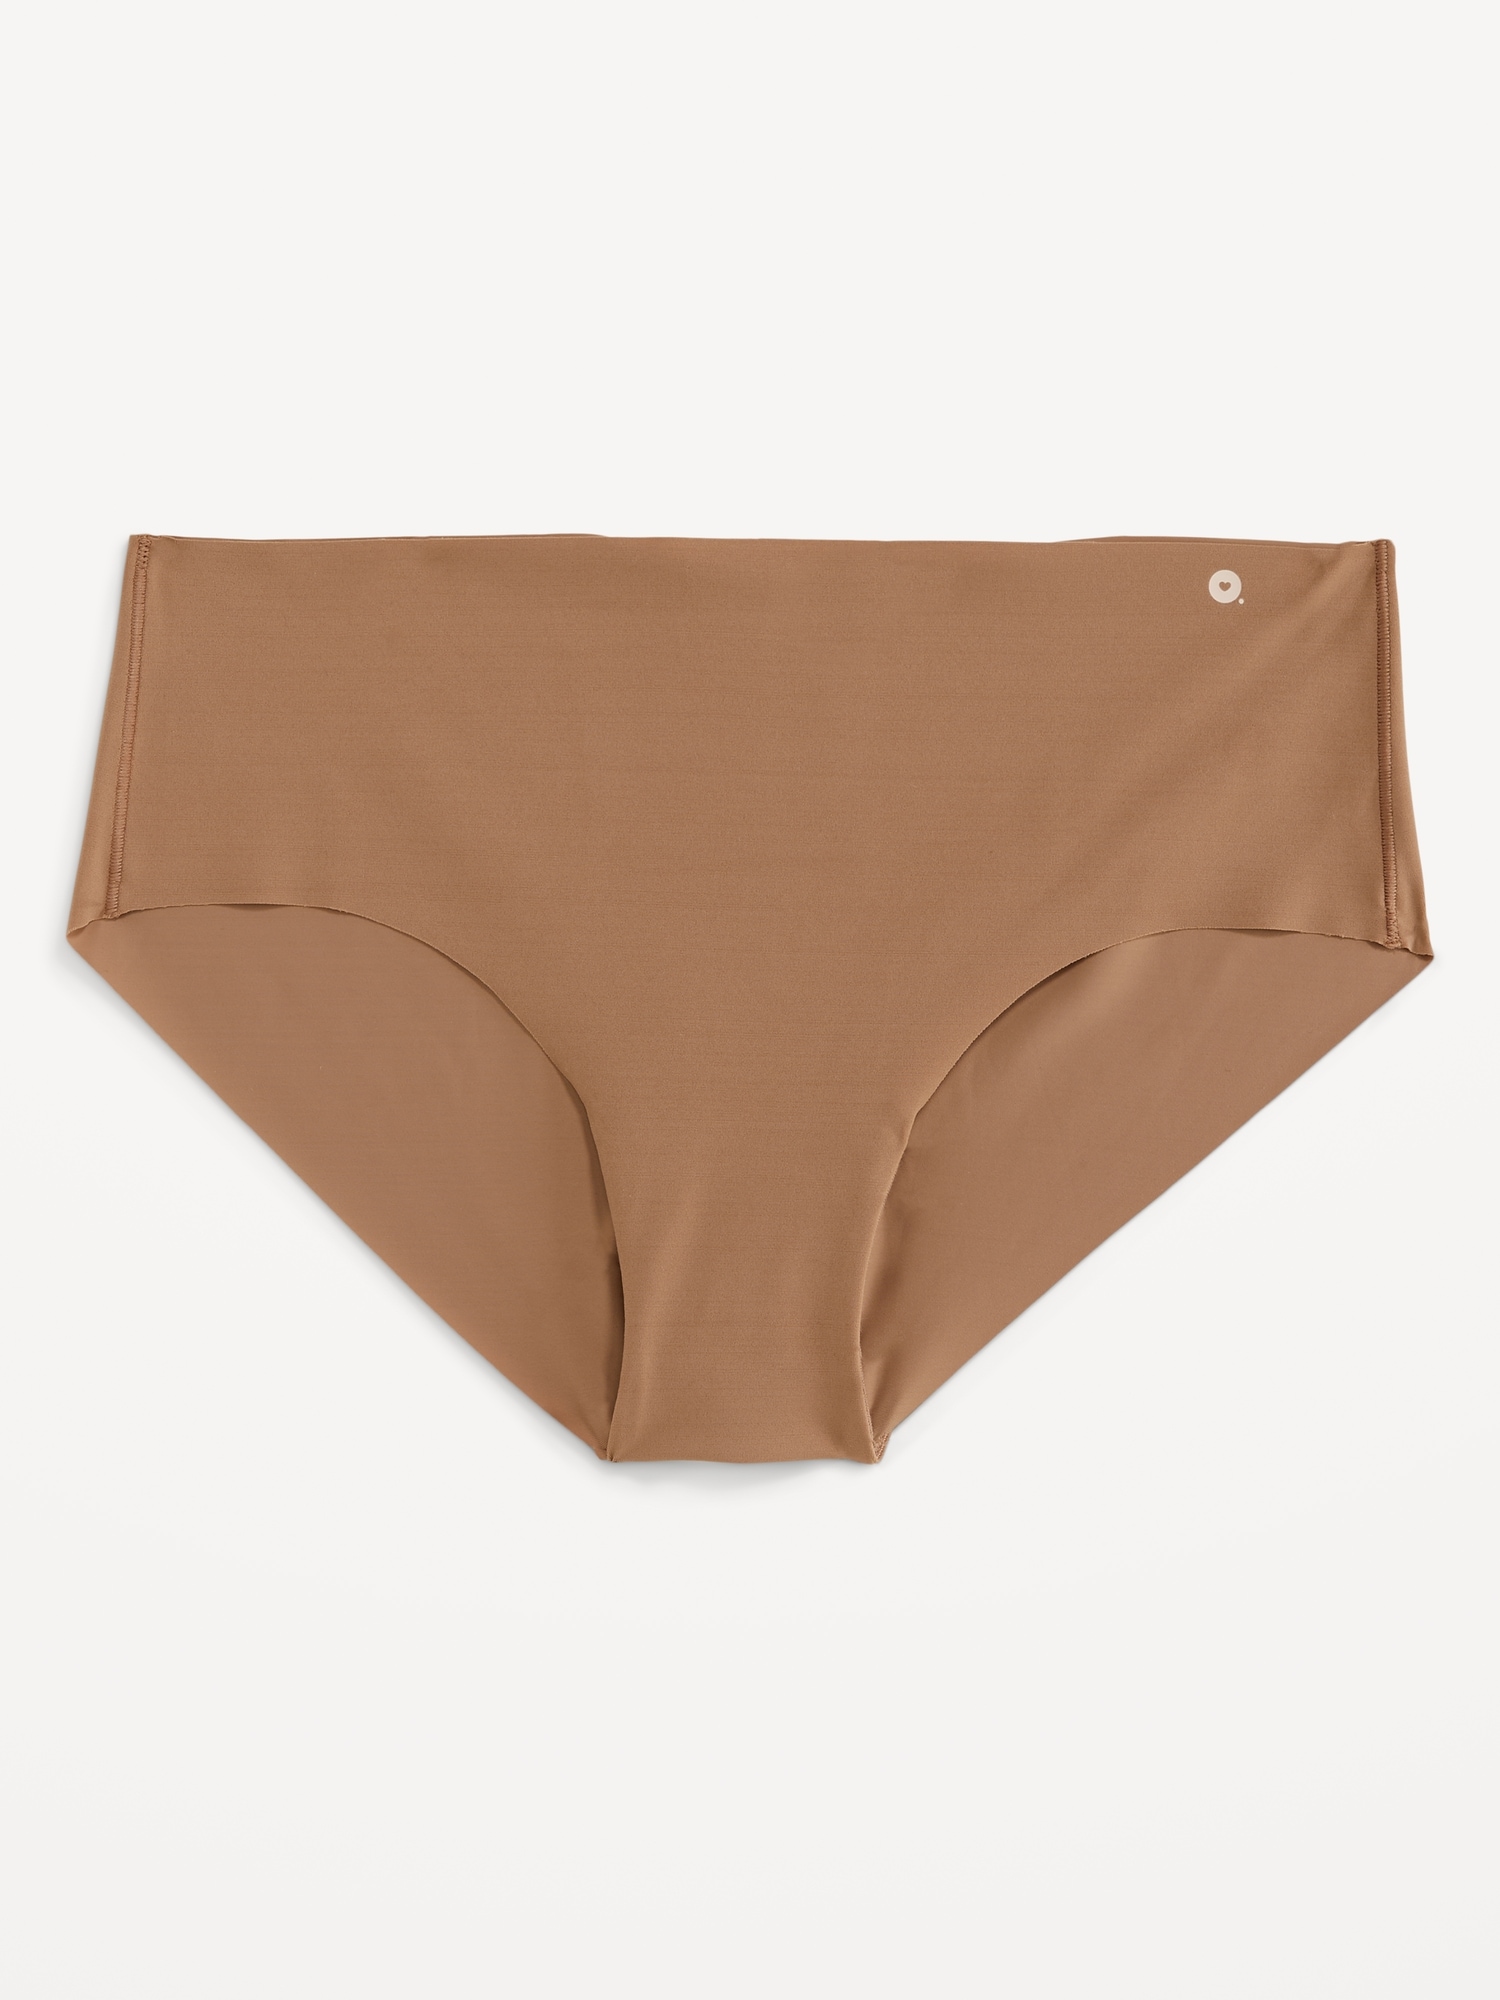 Seamless knickers 2 pack Color dark brown - RESERVED - 1342R-89X